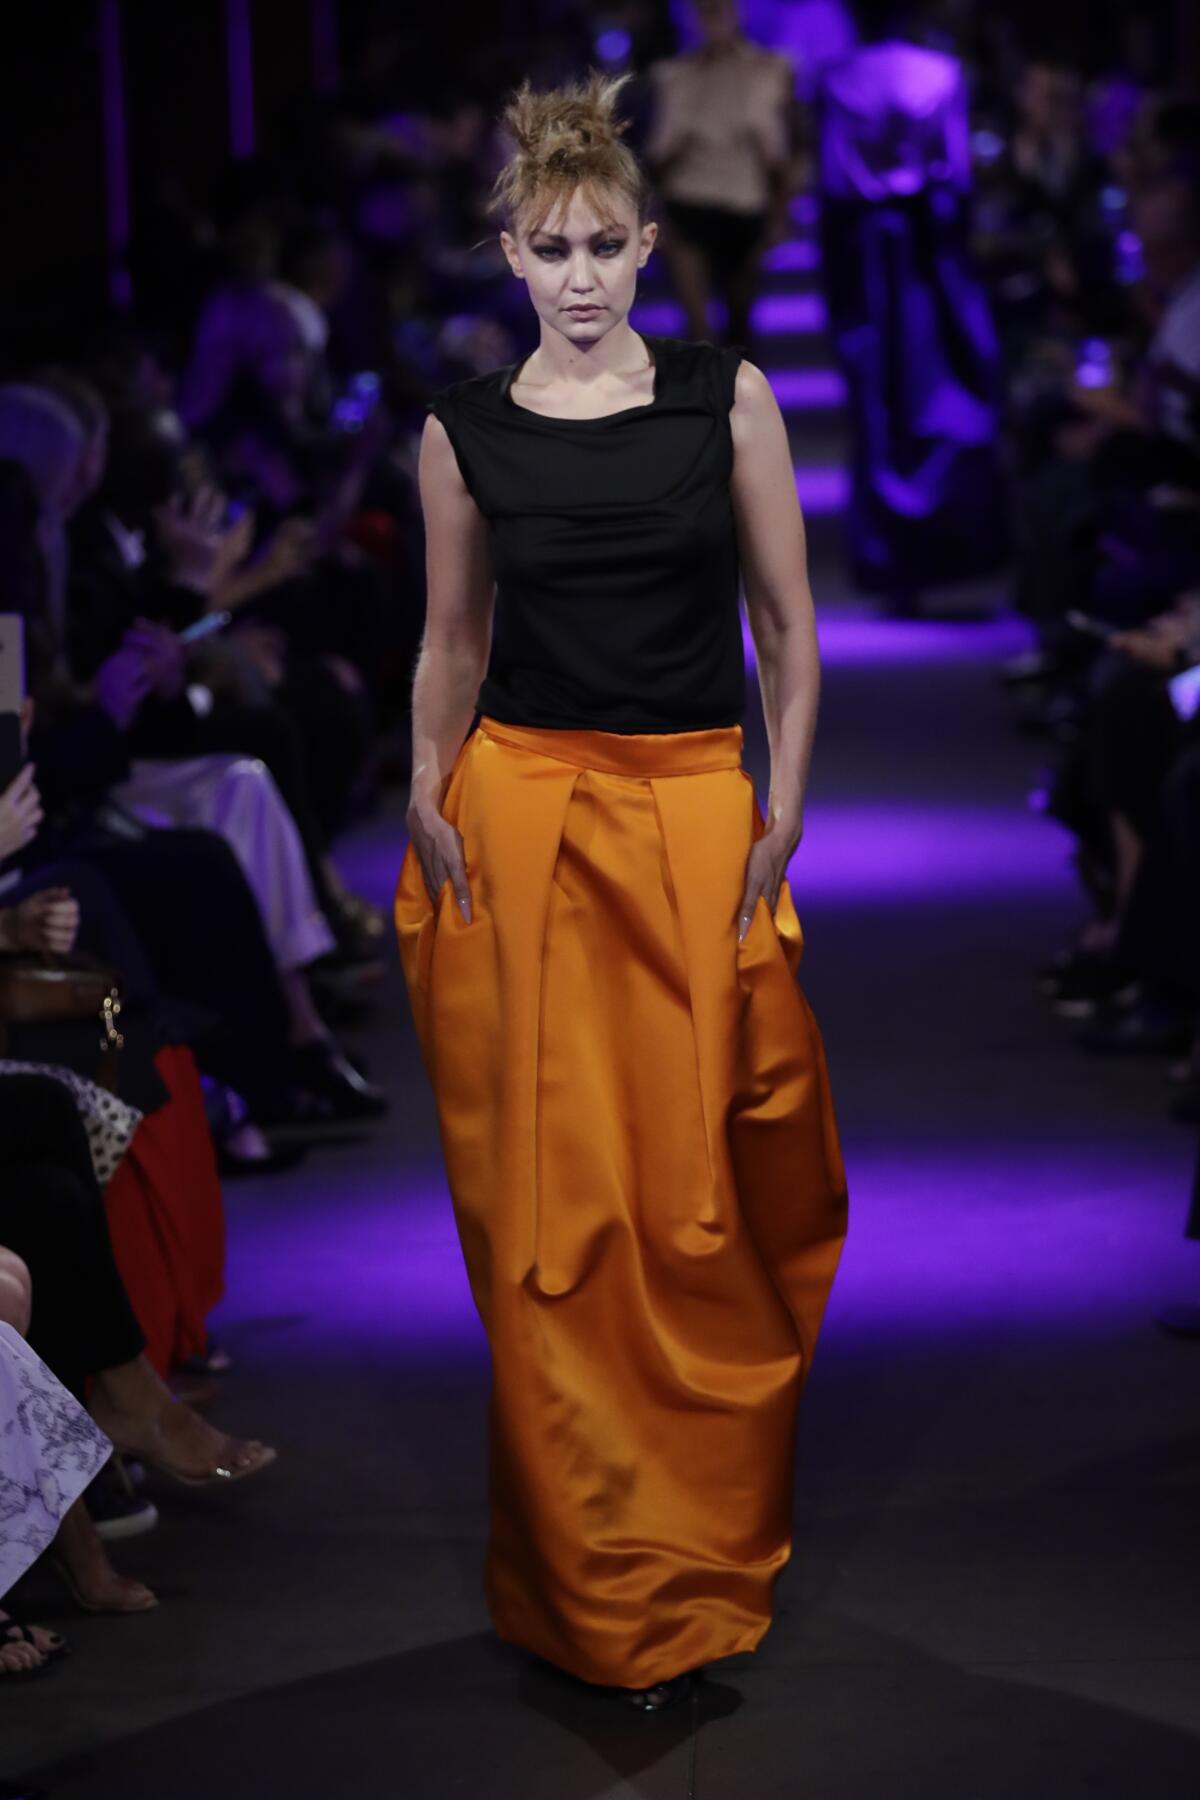 A look from the spring and summer 2020 Tom Ford runway collection: a simple black top and slouchy orange skirt